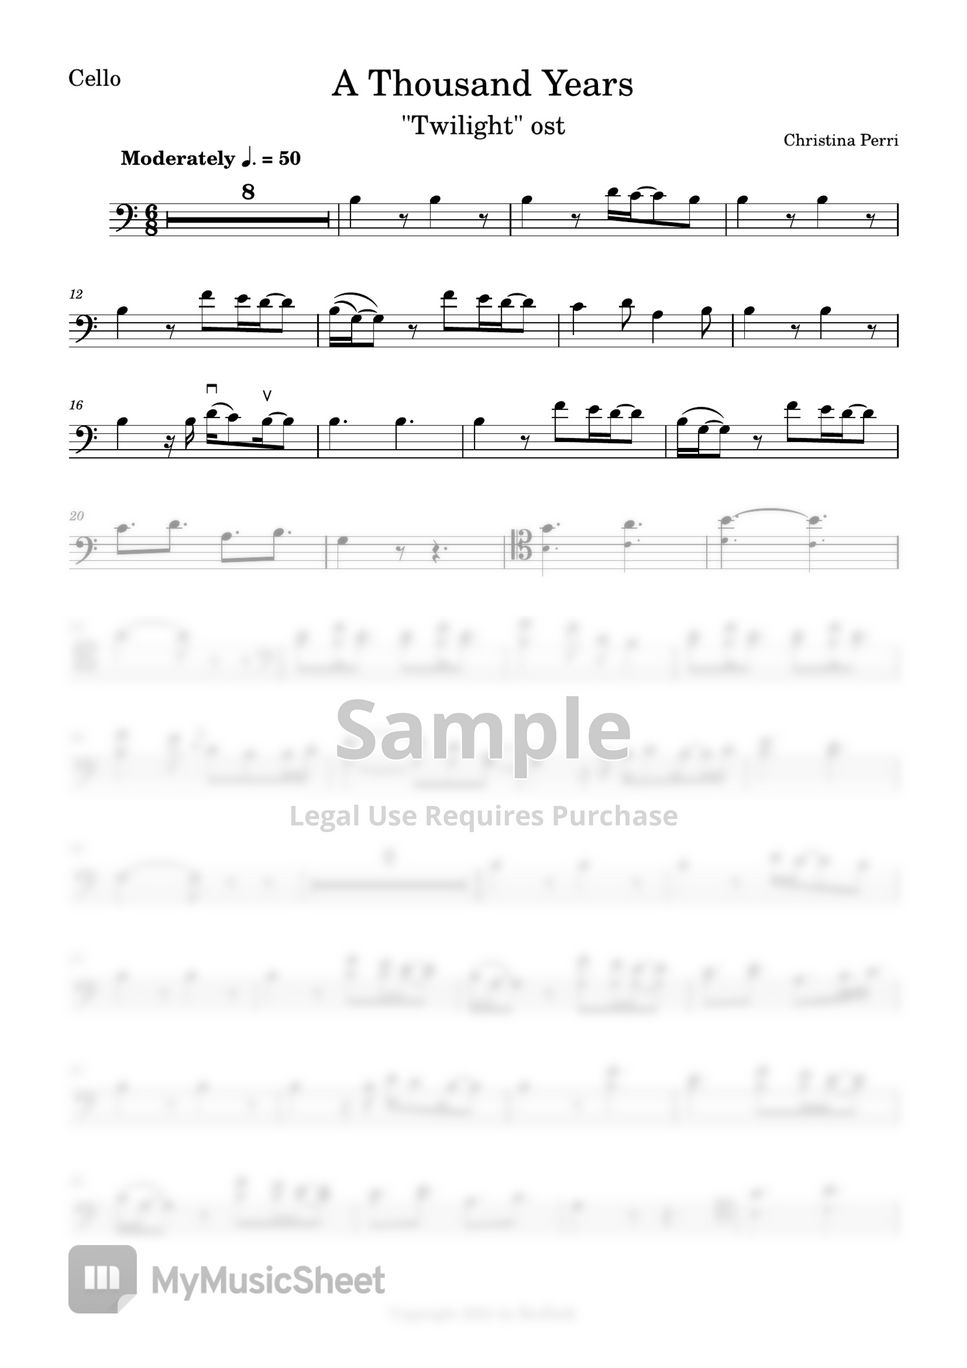 'Twilight' movie OST - A Thousand Years (Christina Perri) (Cello sheet) by BroPark